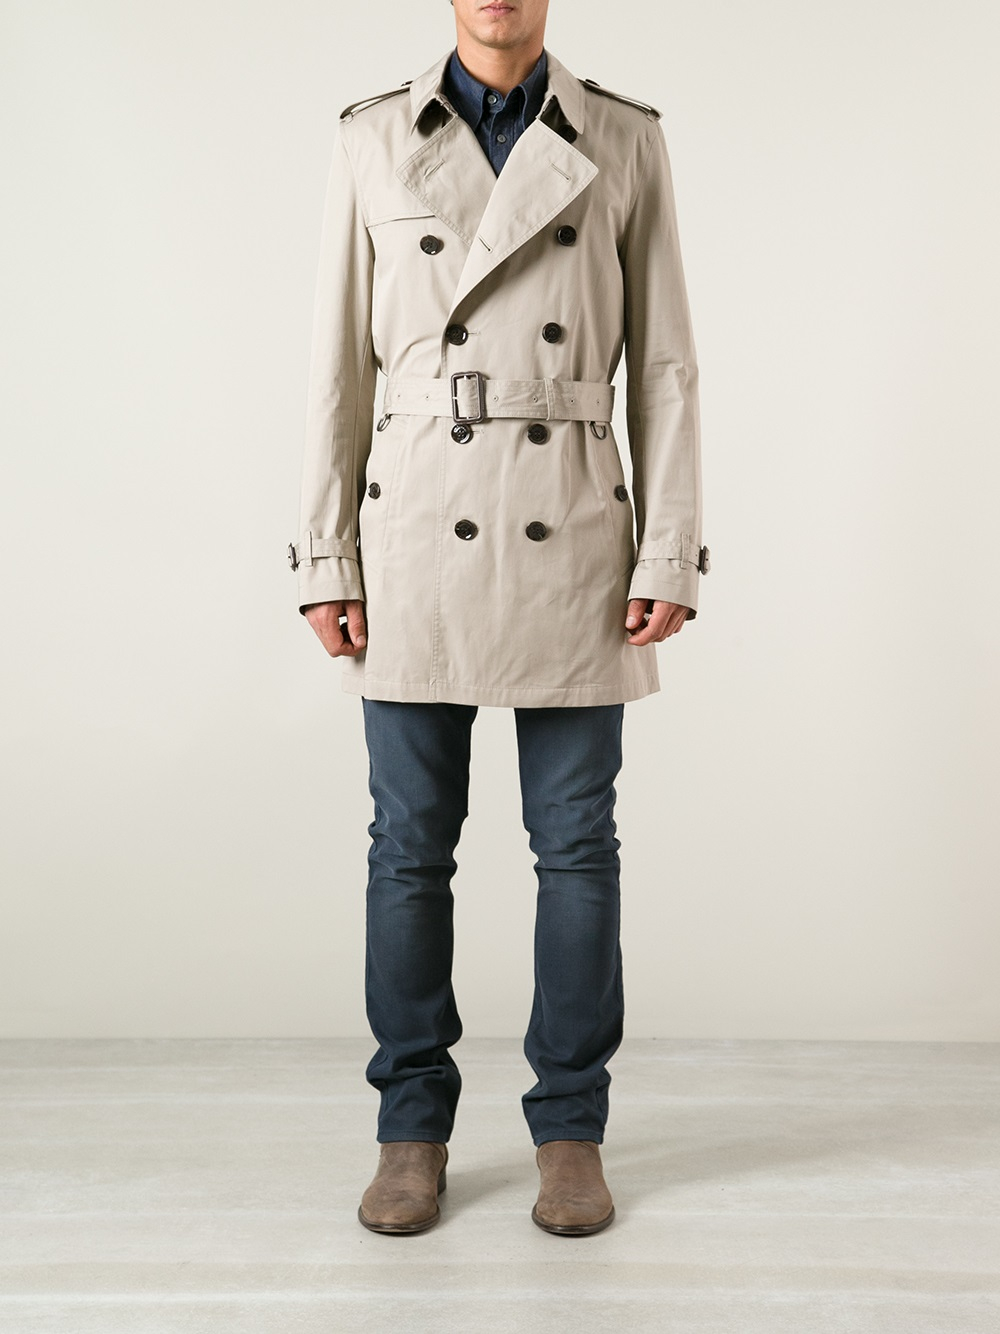 Lyst - Burberry Brit 'Britton' Trench Coat in Natural for Men